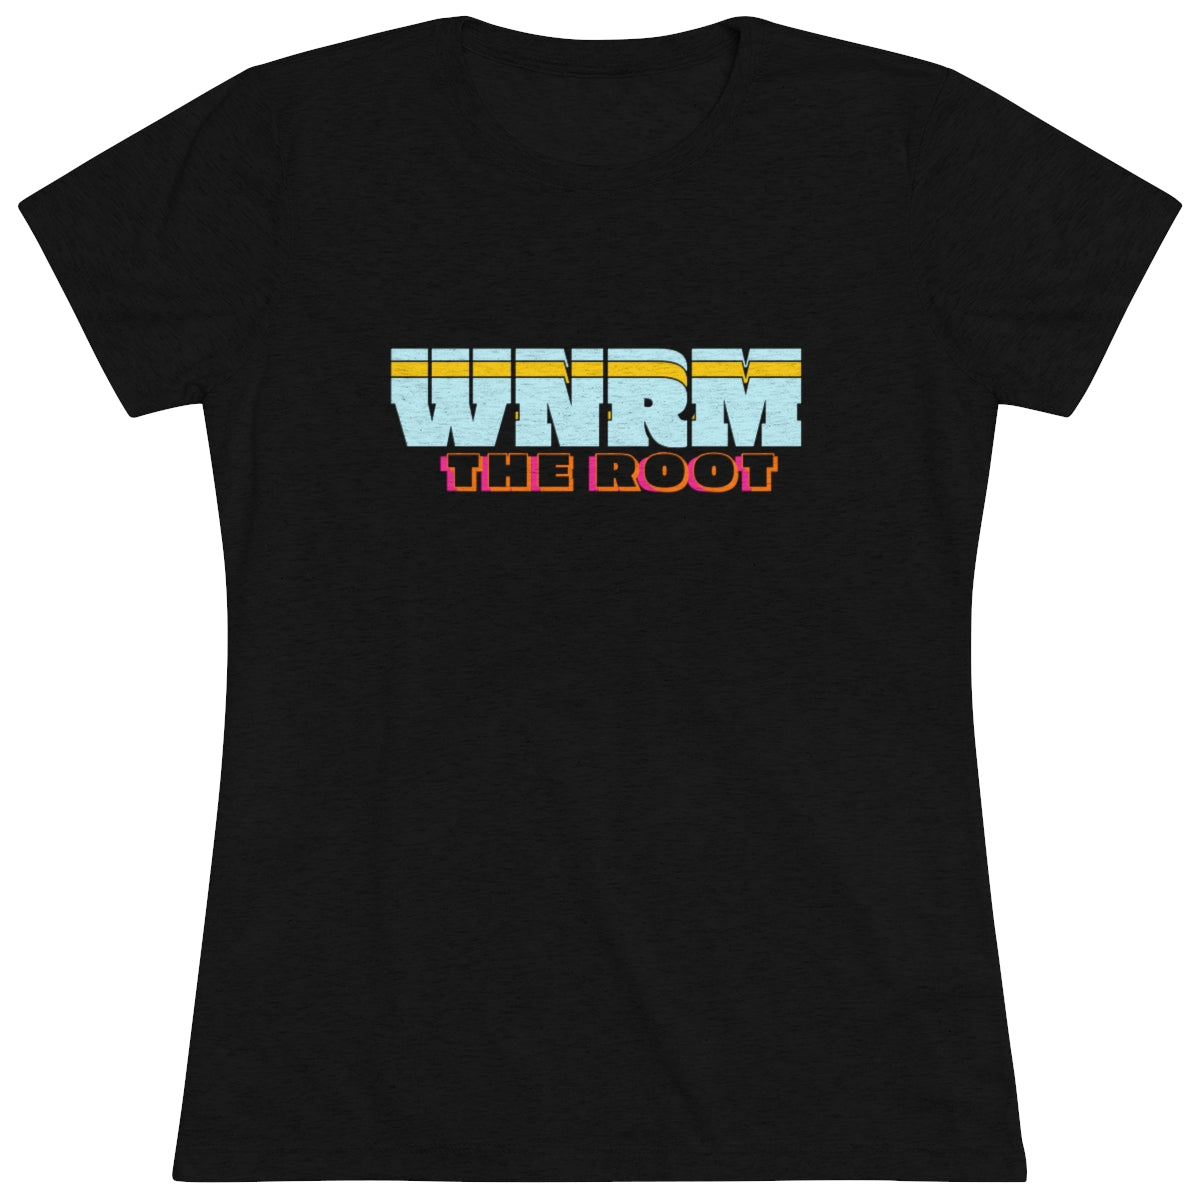 WNRM The Root Logo Tee Women's Triblend Tee, black with white background